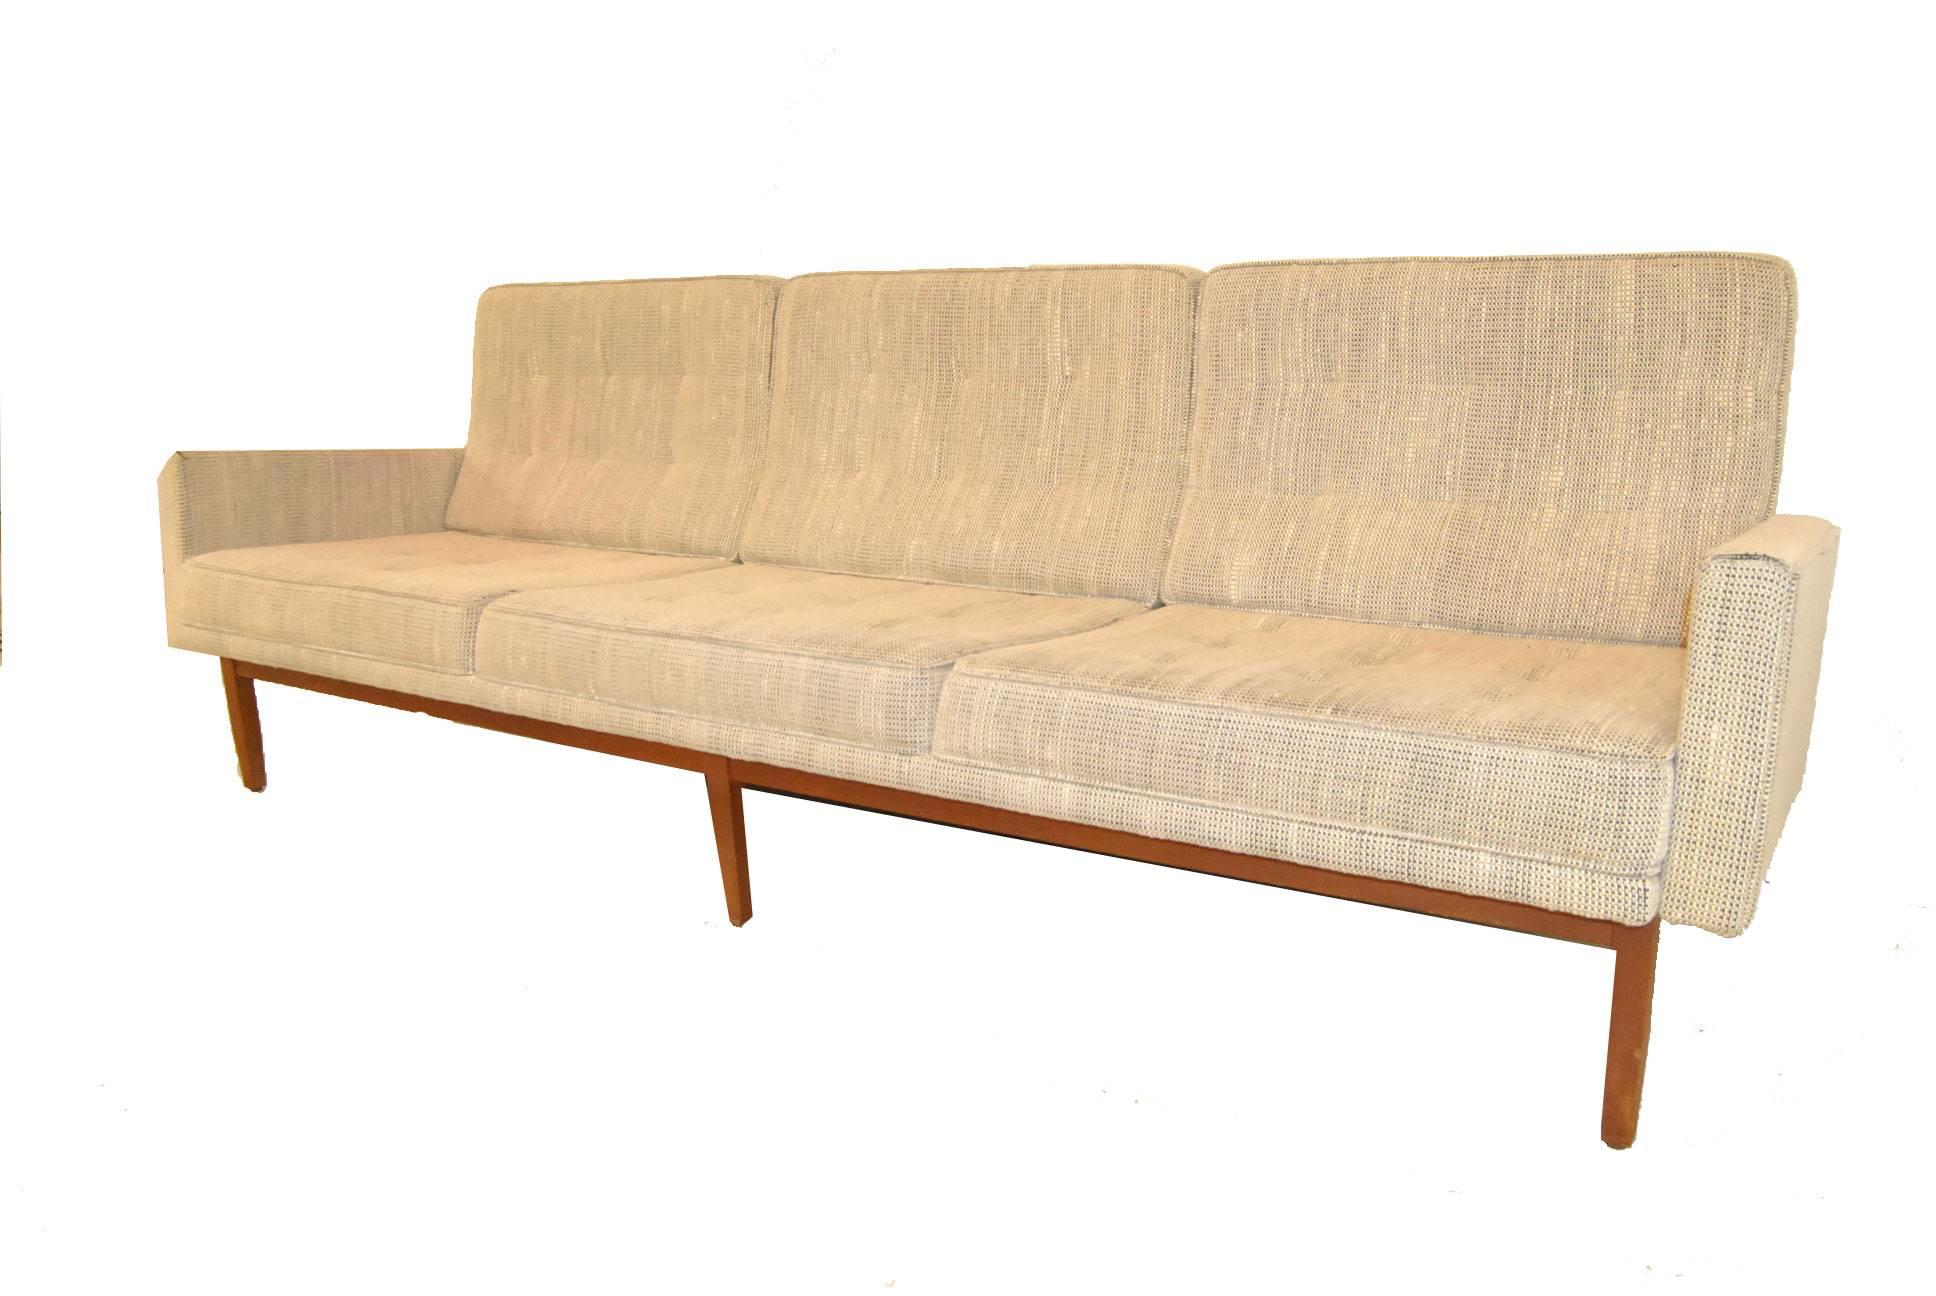 A Classic Mid-Century Knoll model 57W sofa. The floating frame has mortised and pinned construction and is very solid. Original upholstery is in a cream and grey woven fabric with tufted back and seat cushions. Unusual form makes this a highly